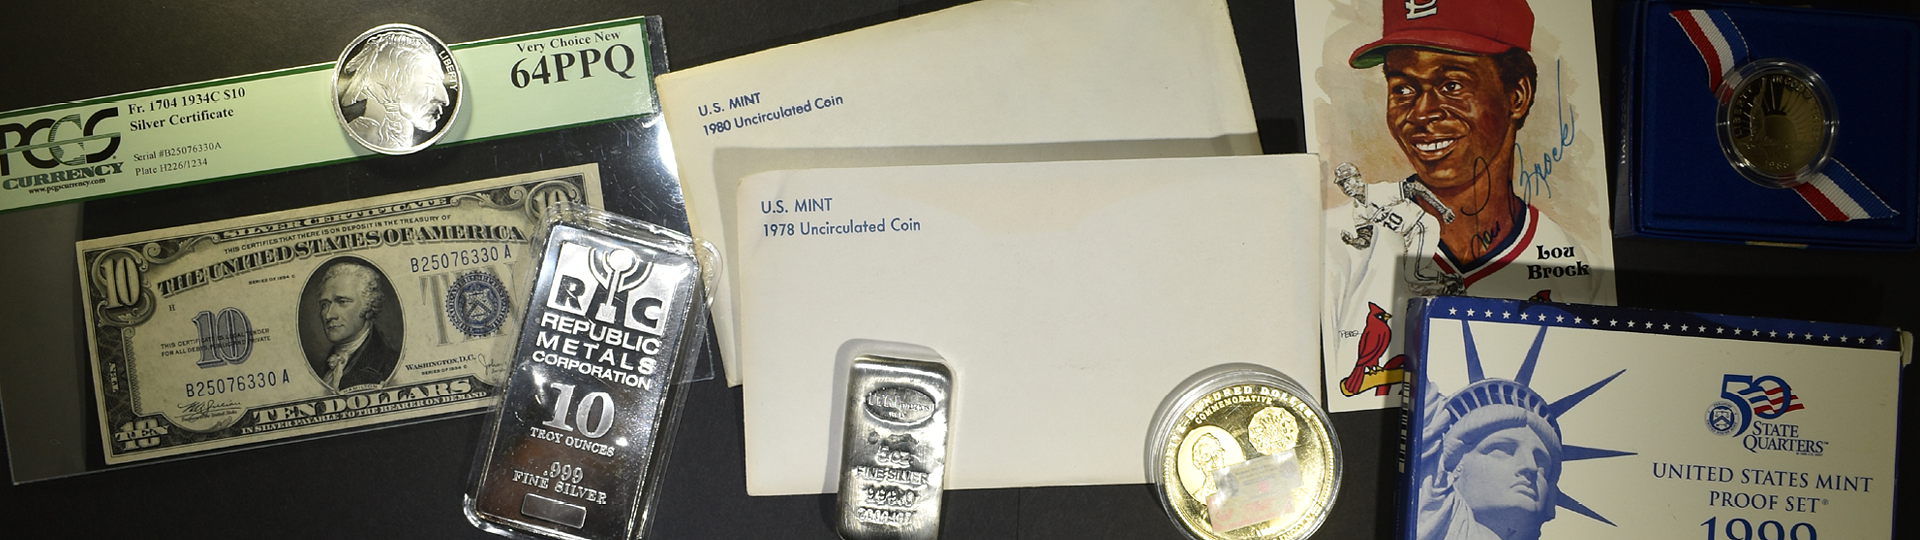 November 30th Silver City Rare Coins & Currency by Silver City Auctions